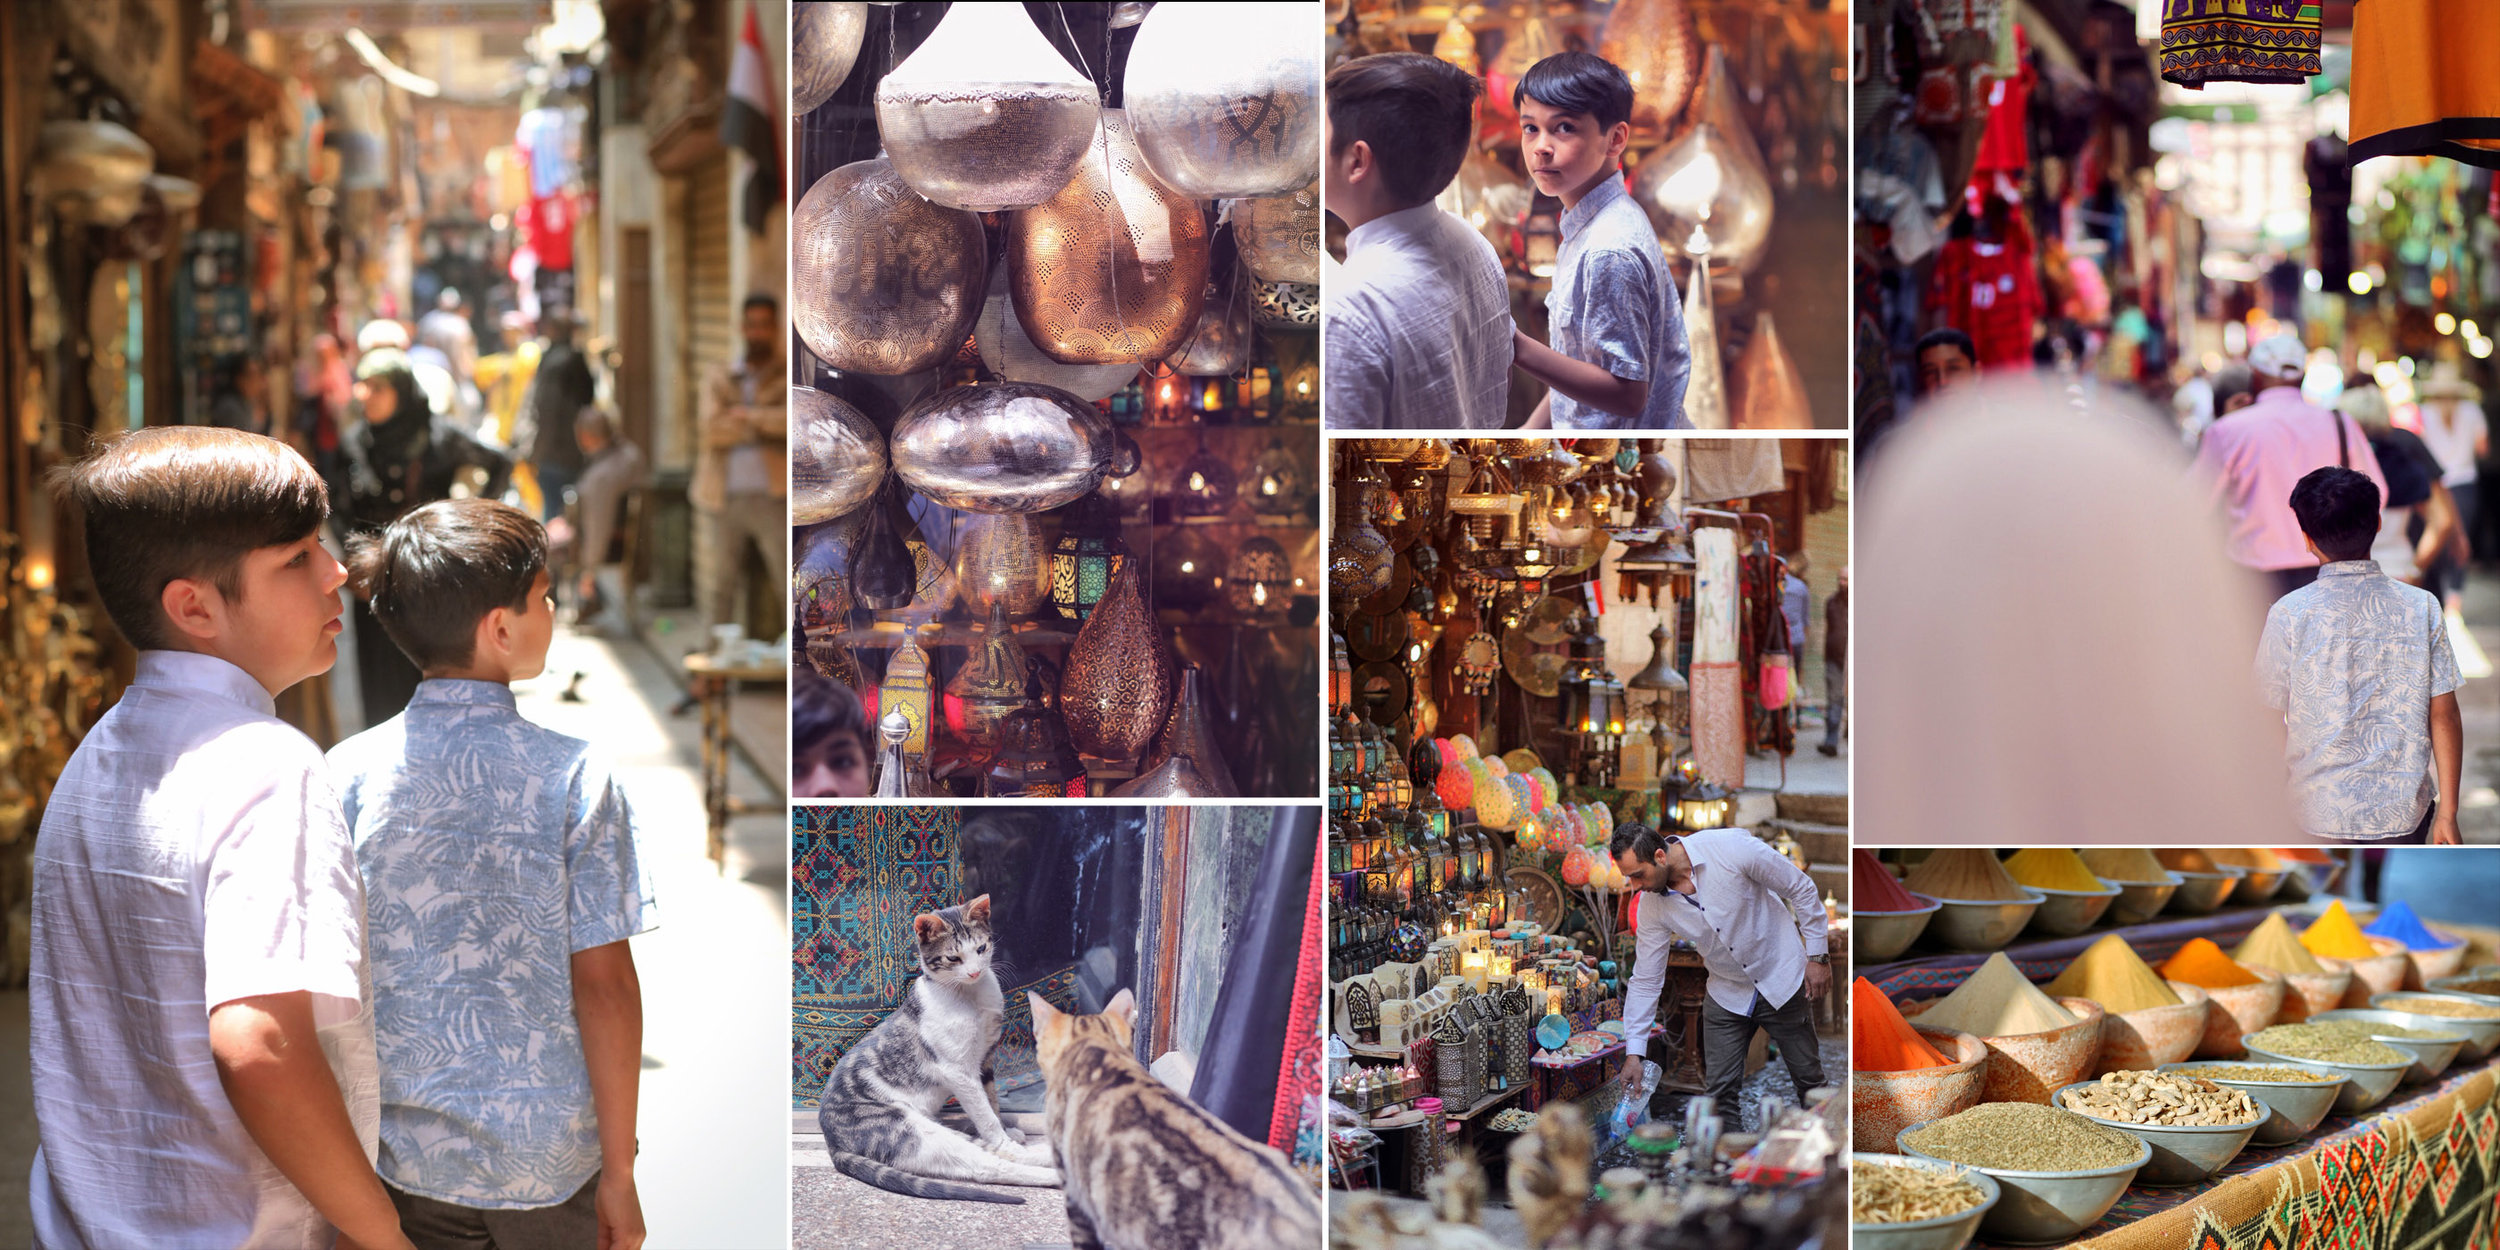 An Egyptian bazaar flows like its own kind of river. We let the currents of people, sound, smells, and textures, carry us.